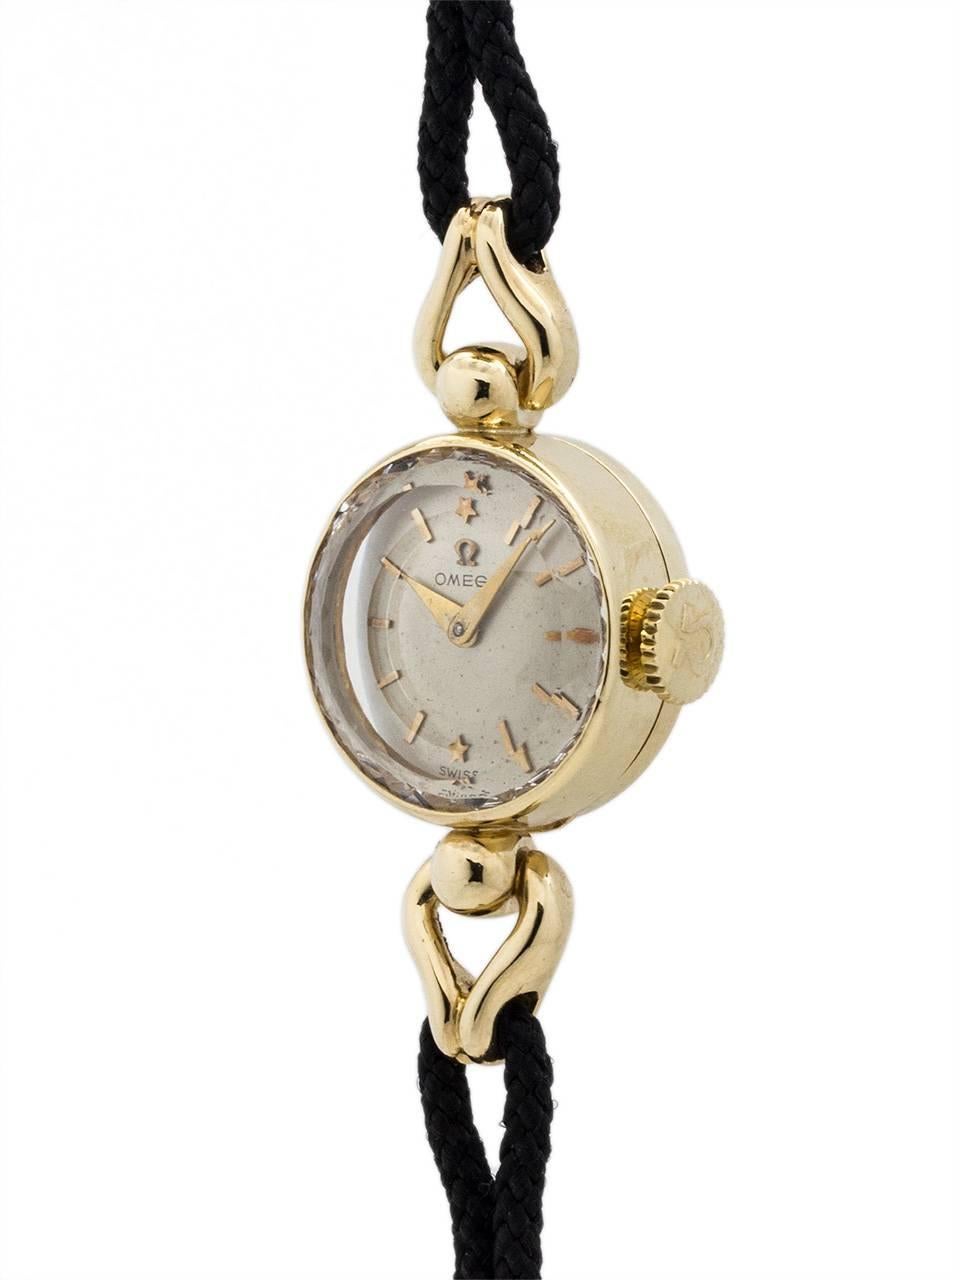 Vintage lady’s Omega 14K YG circa 1950’s. Featuring round case with elegant design ball design attachment for a nicely contoured hinge attachment for cord bracelet. Featuring a diamond cut mineral glass crystal, original silvered satin dial with